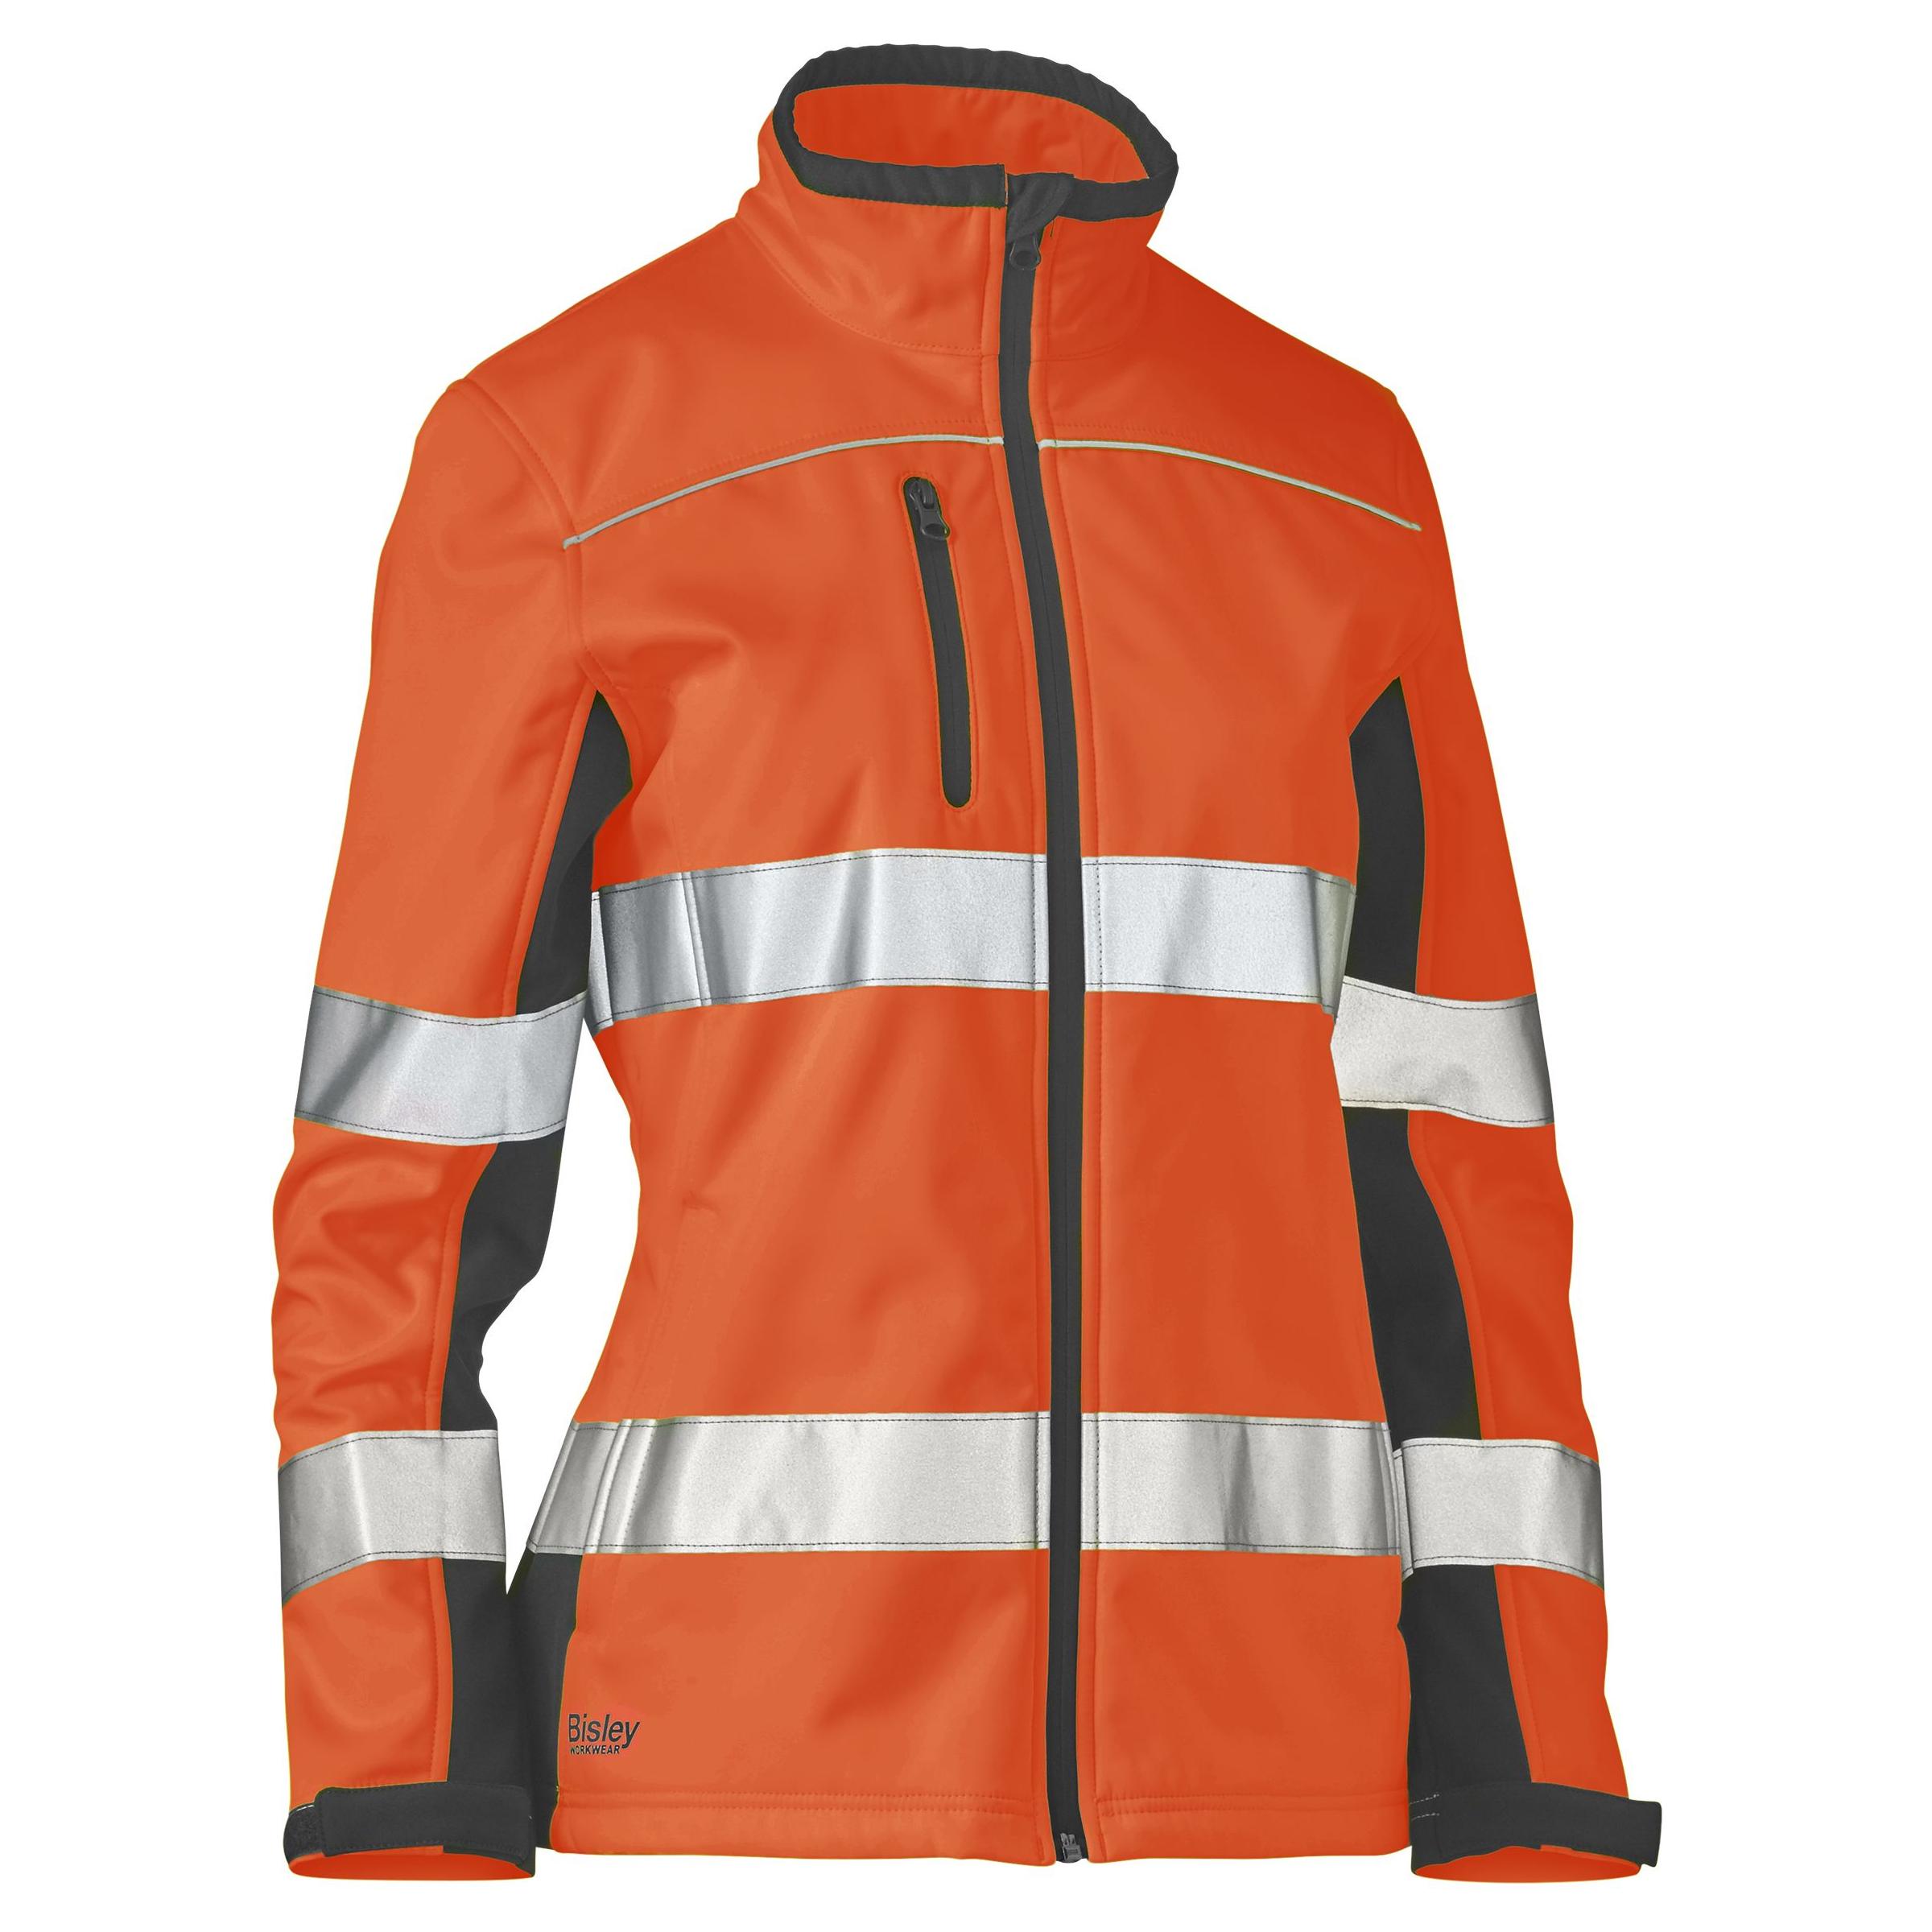 Womens Taped Two Tone Hi Vis Soft Shell Jacket - BJL6059T